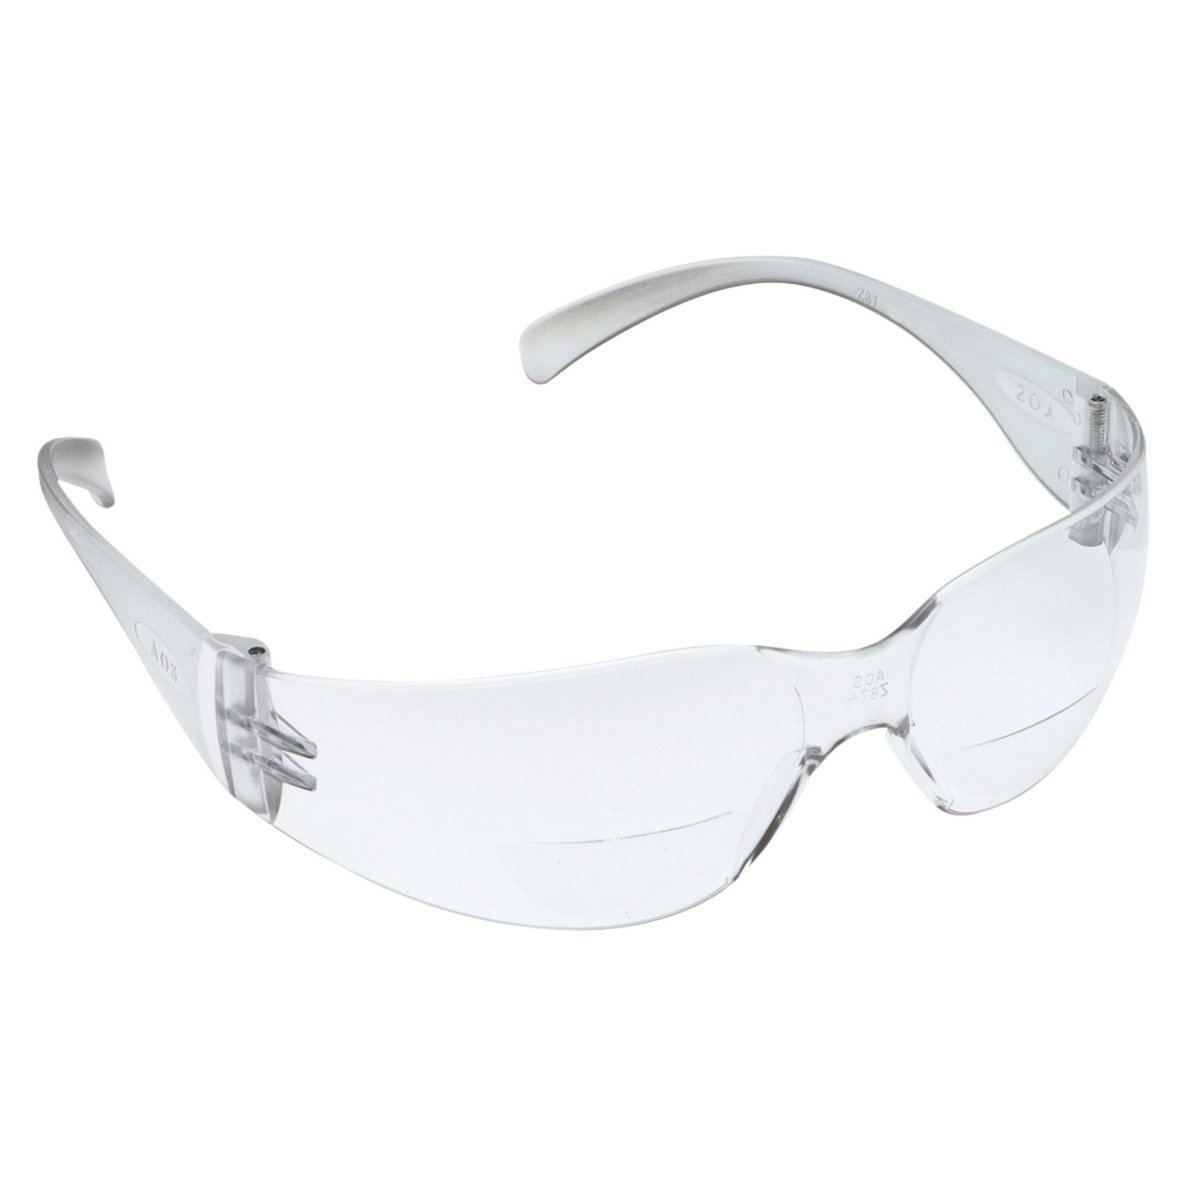 3M™ Virtua™ Reader Protective Eyewear 11513-00000-20 Clear Anti-Fog Lens, Clear Temple, +1.5 Diopter (Availability restrictions